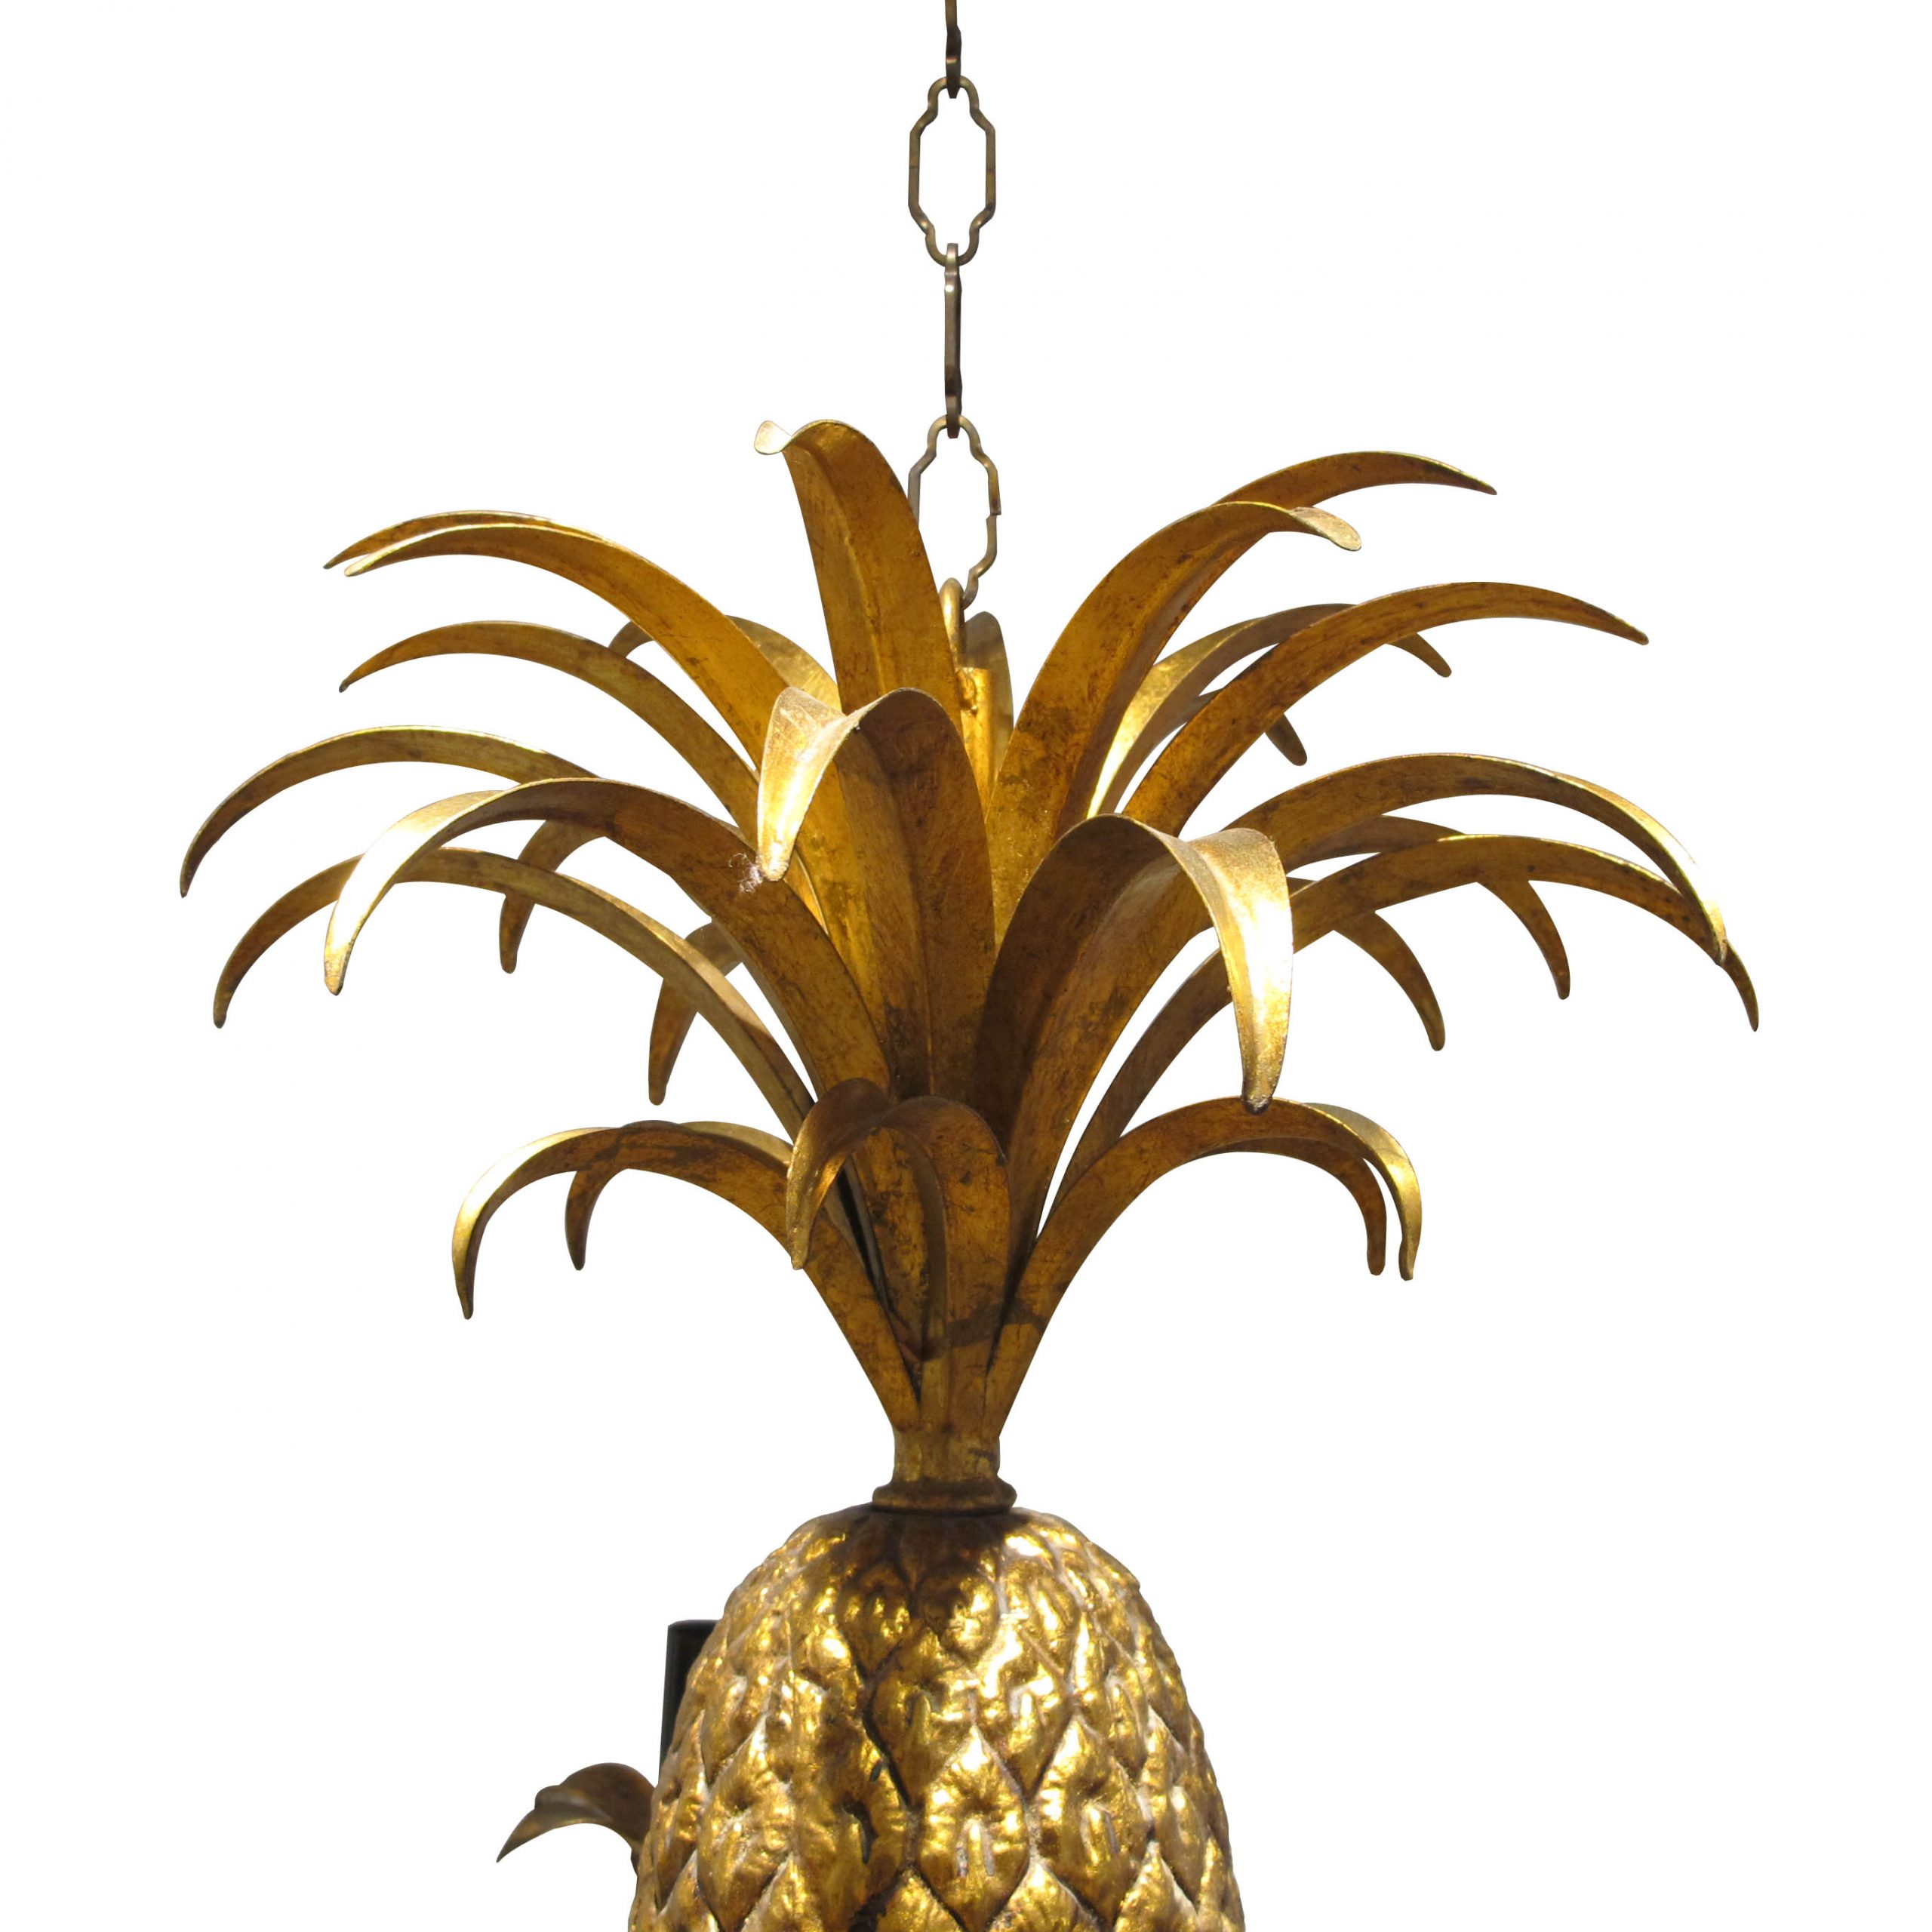 VINTAGE FAUX BAMBOO PINEAPPLE 🍍 6 LIGHT CHANDELIER W/SHADES